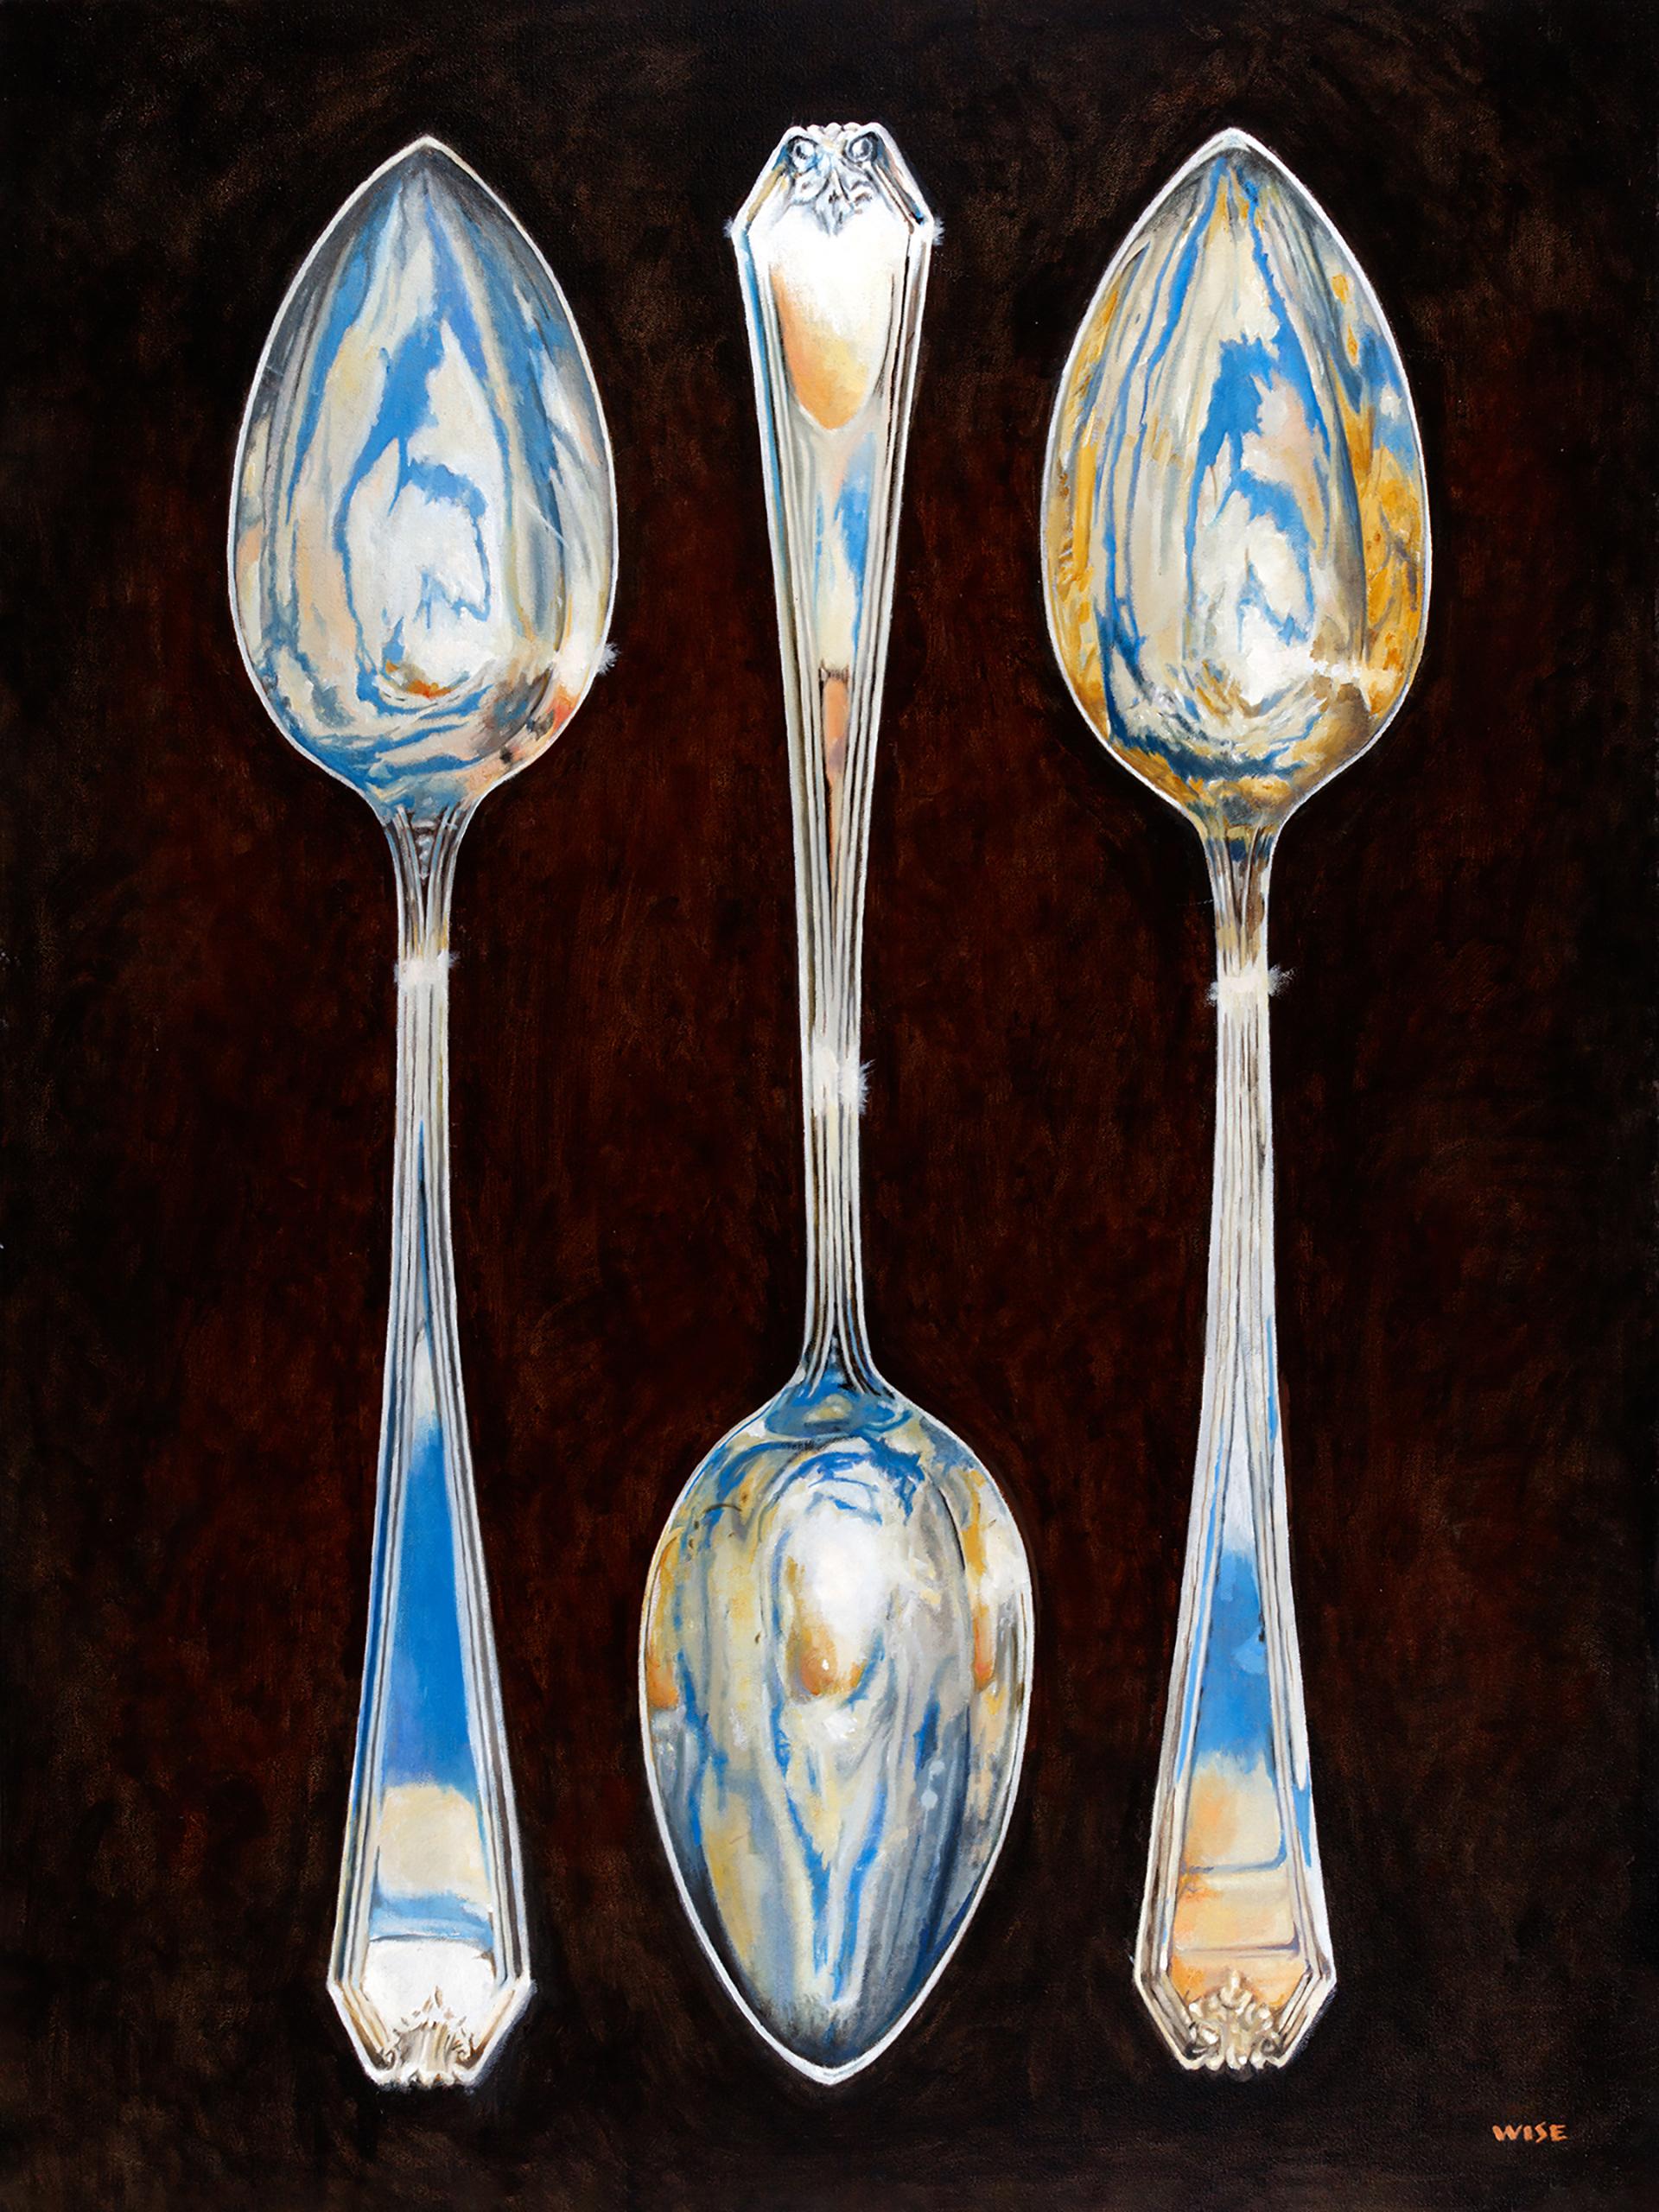 Jim Wise Still-Life Painting - "Sterling" - Surrealist still life - reflections - silver - Georgia O'Keeffe